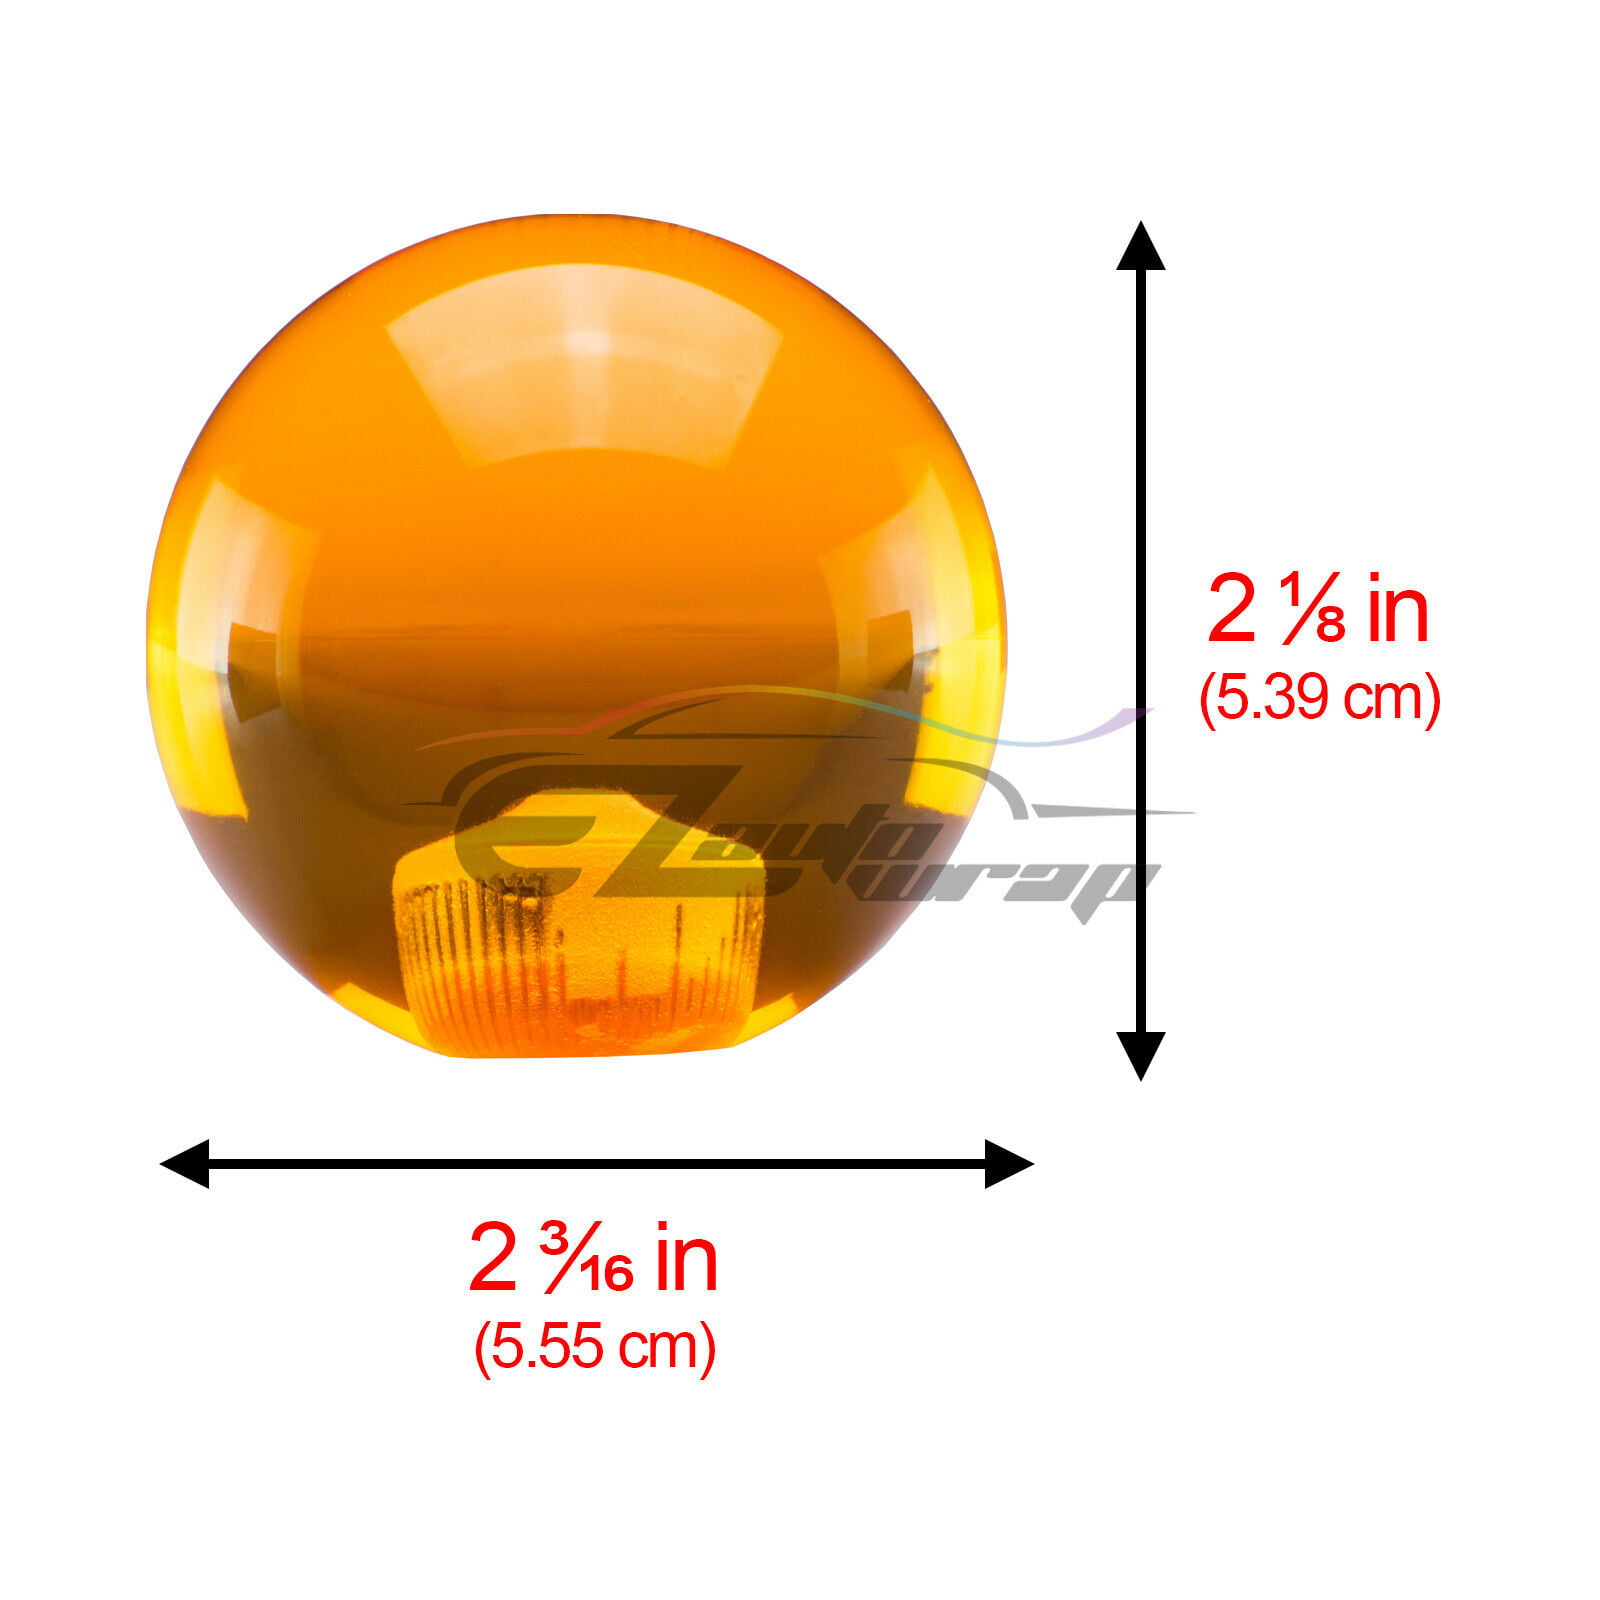 Details about   Universal Blue Dragon Ball Z 3 Star 54mm Shift Knob With Adapters Fit Most Cars